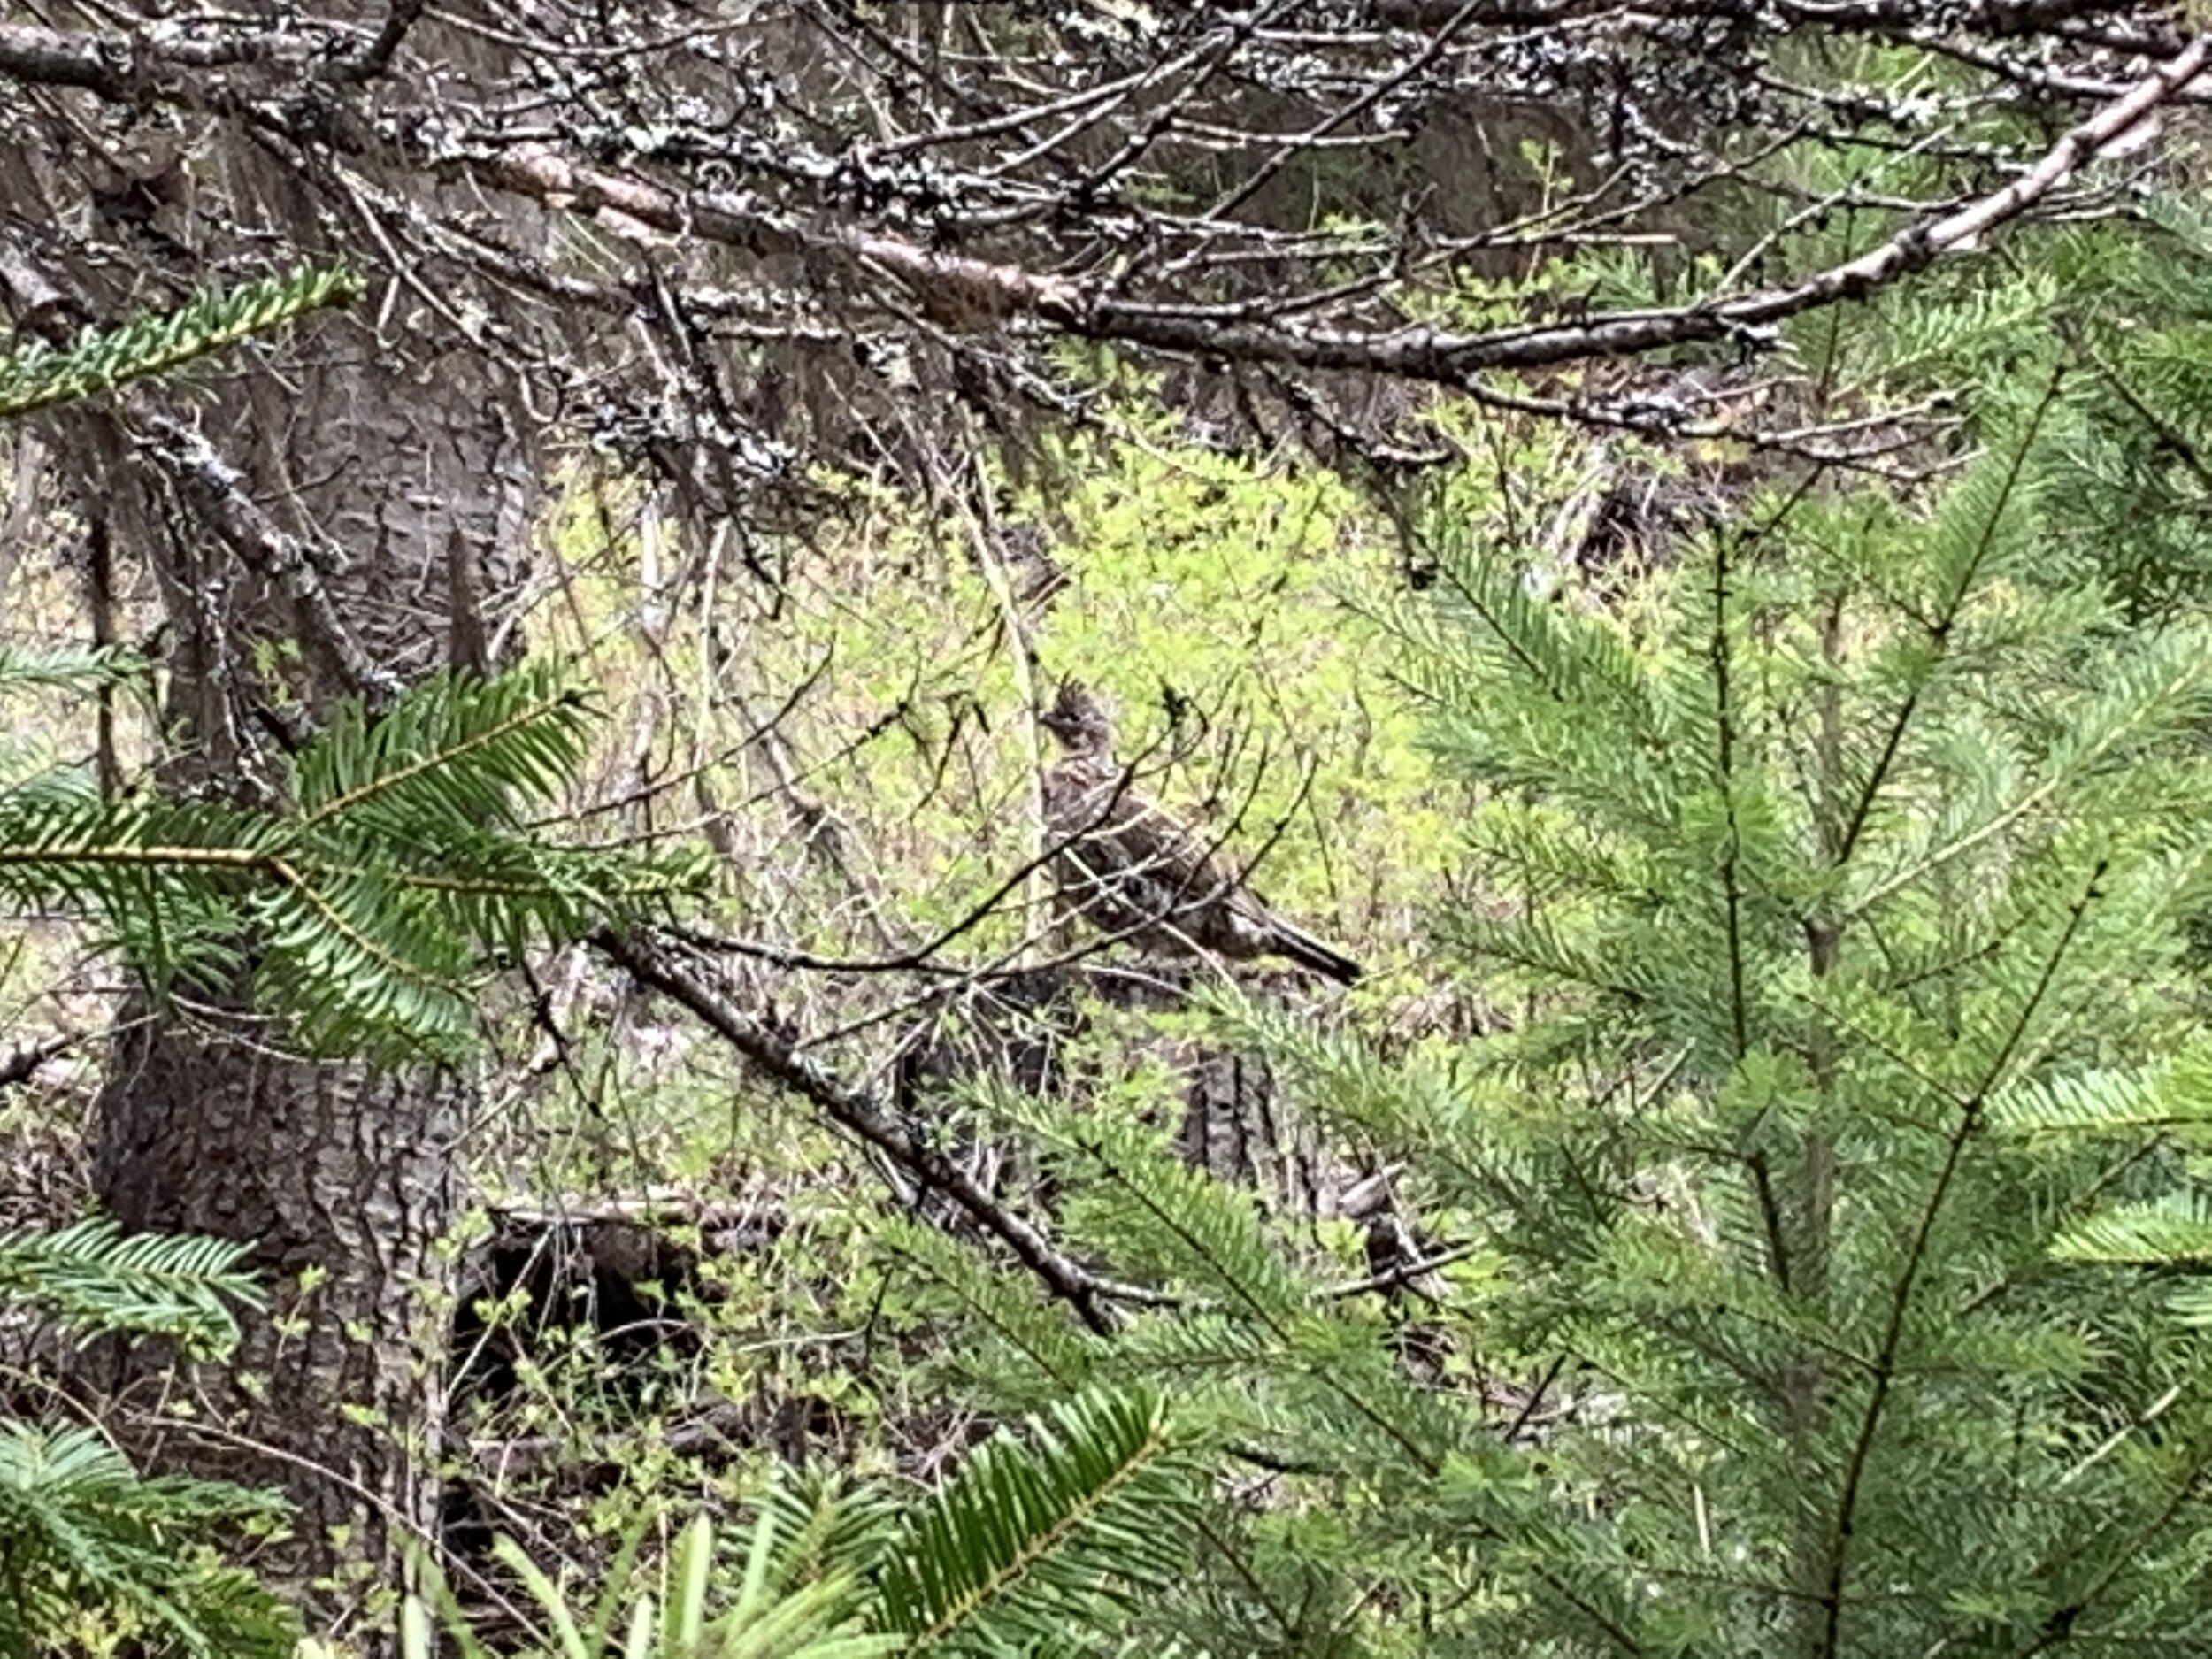 2020-05-17 Ruffed Grouse on the Seiver Ranch.jpg